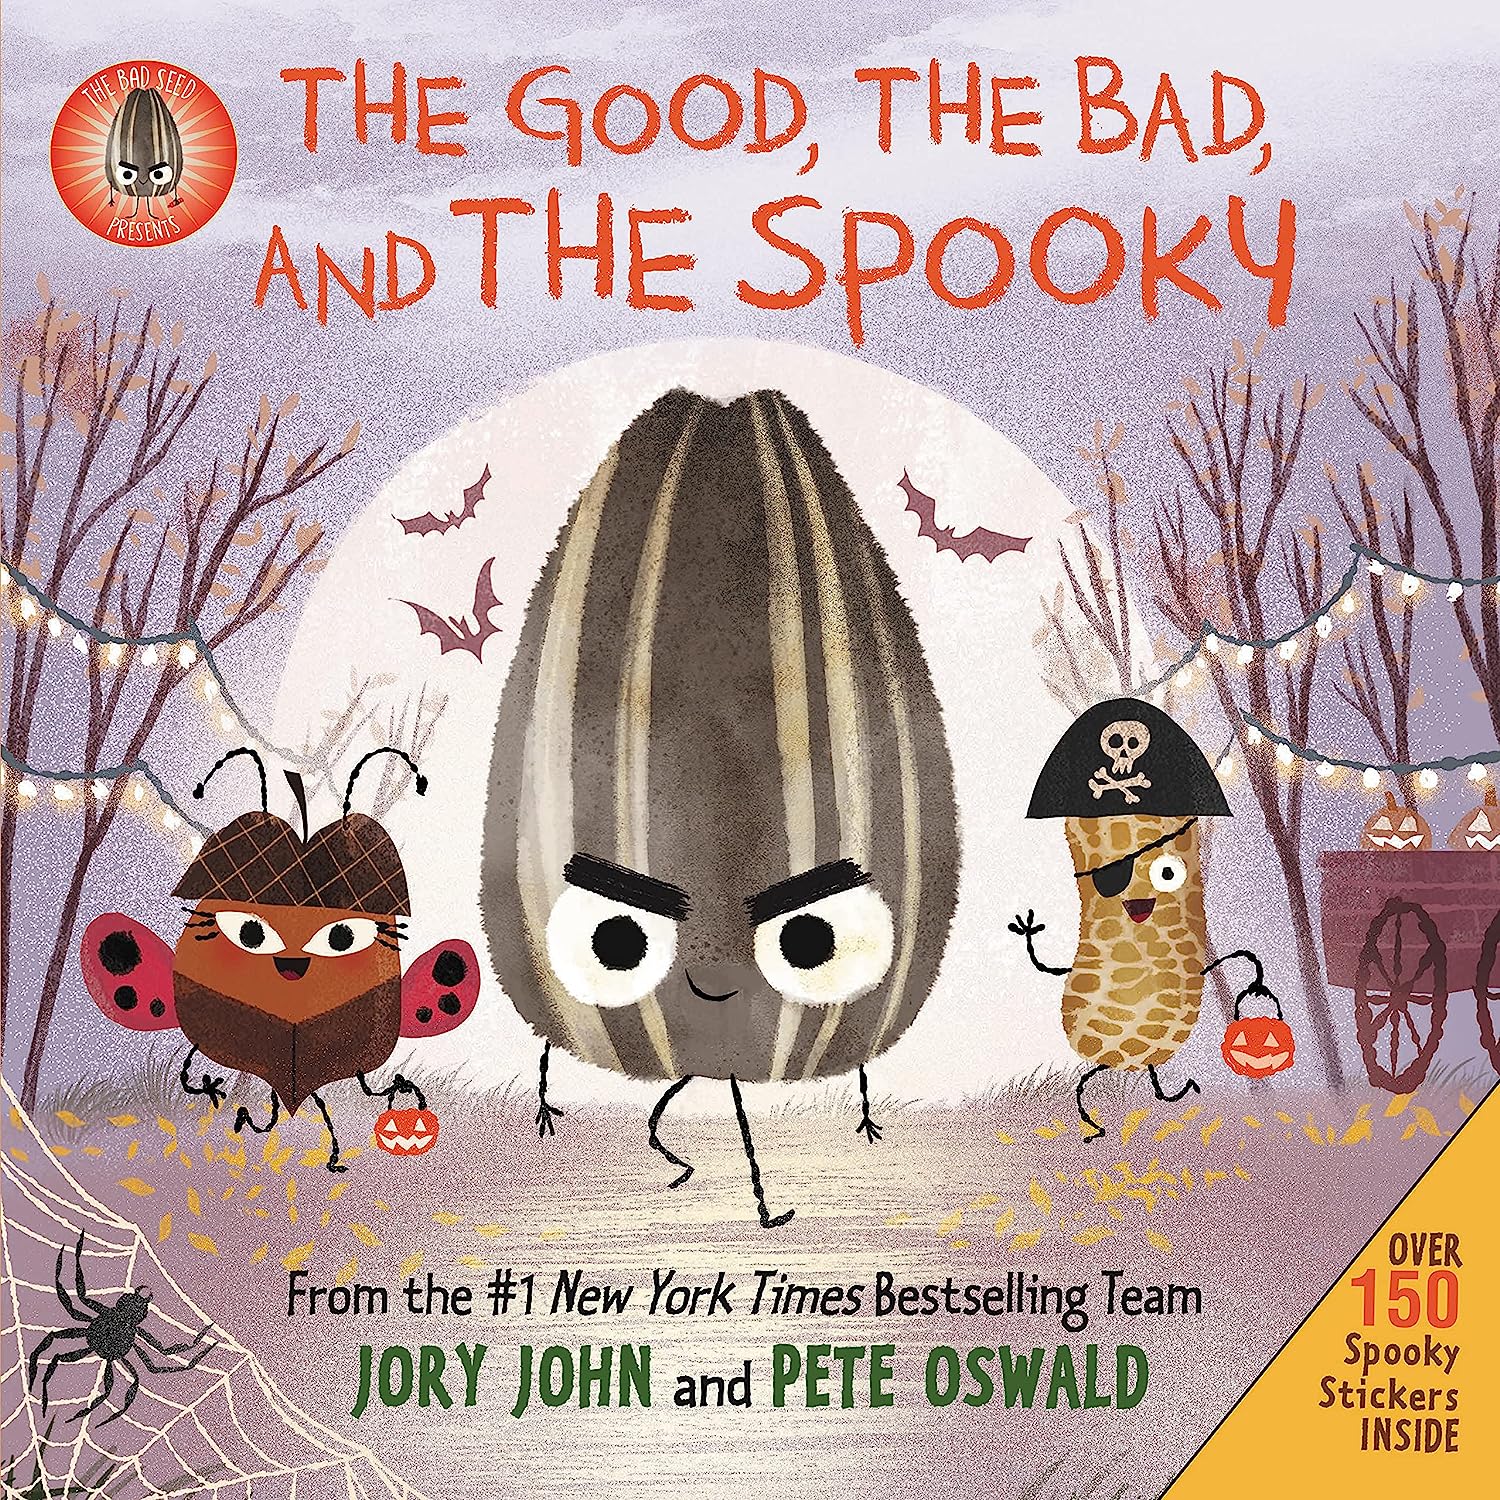 The Good, the Bad, and the Spooky.